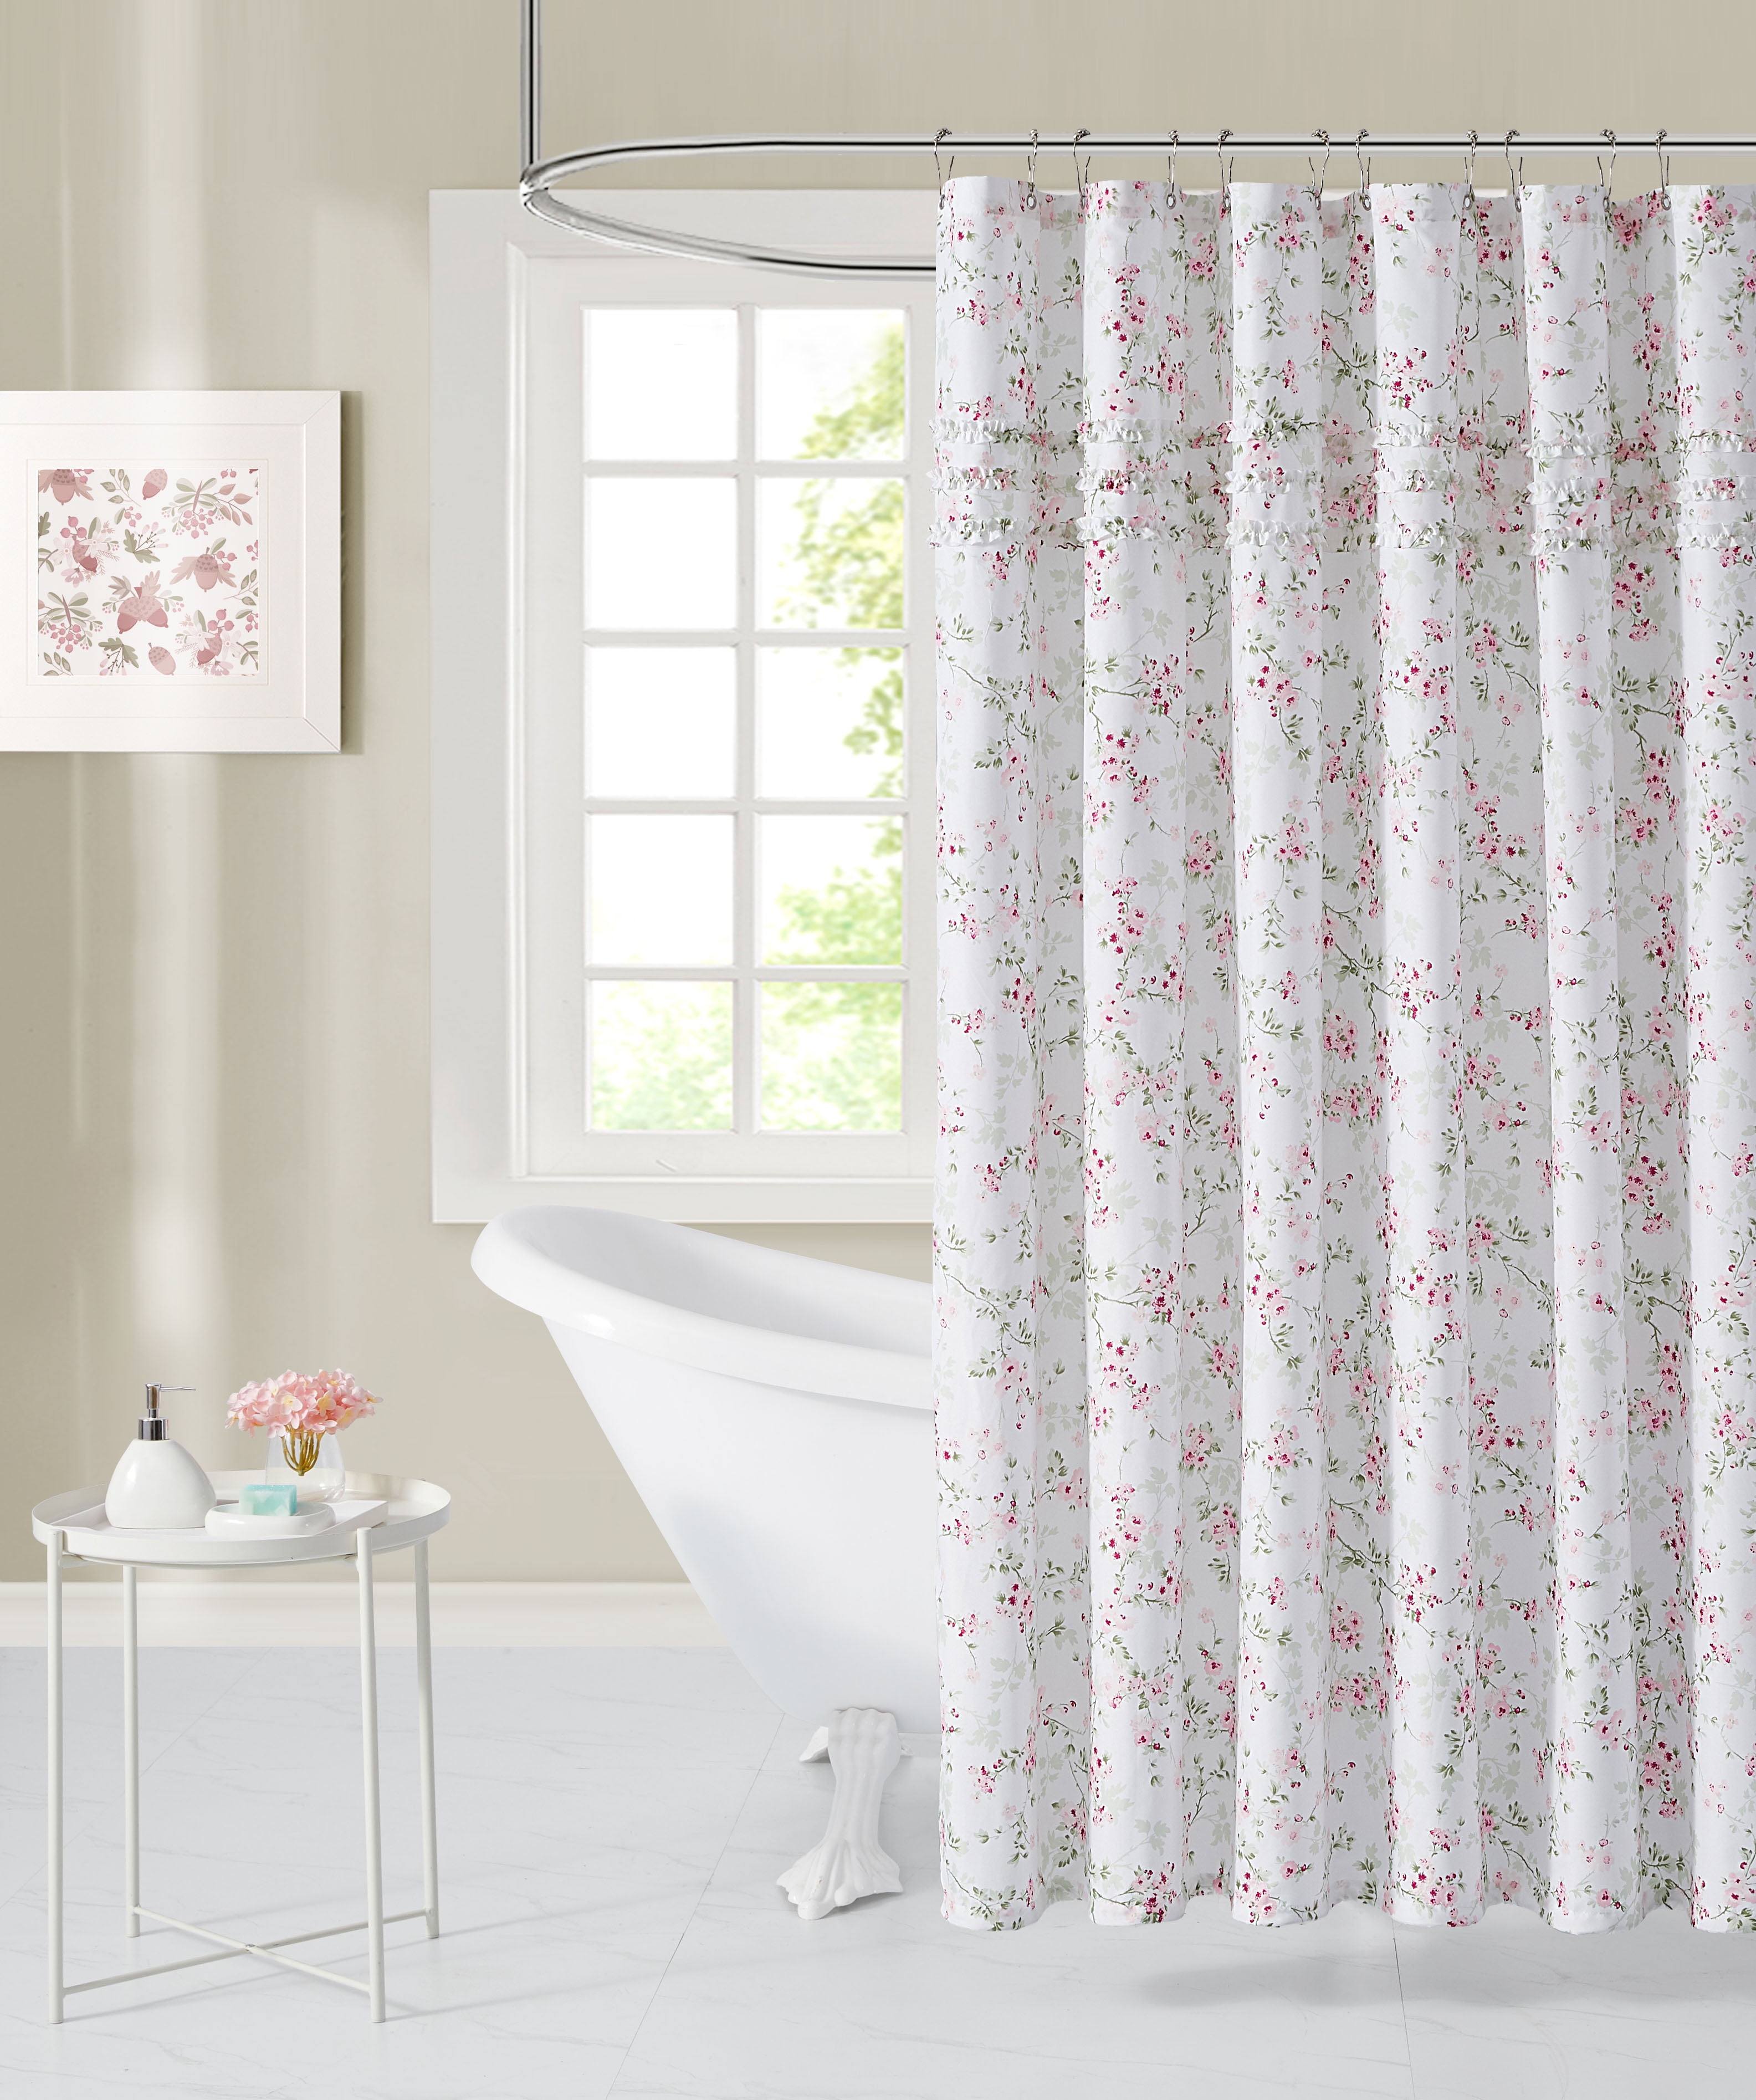 Simply Shabby Chic Cherry Blossum Printed Polyester Shower Curtain with ...